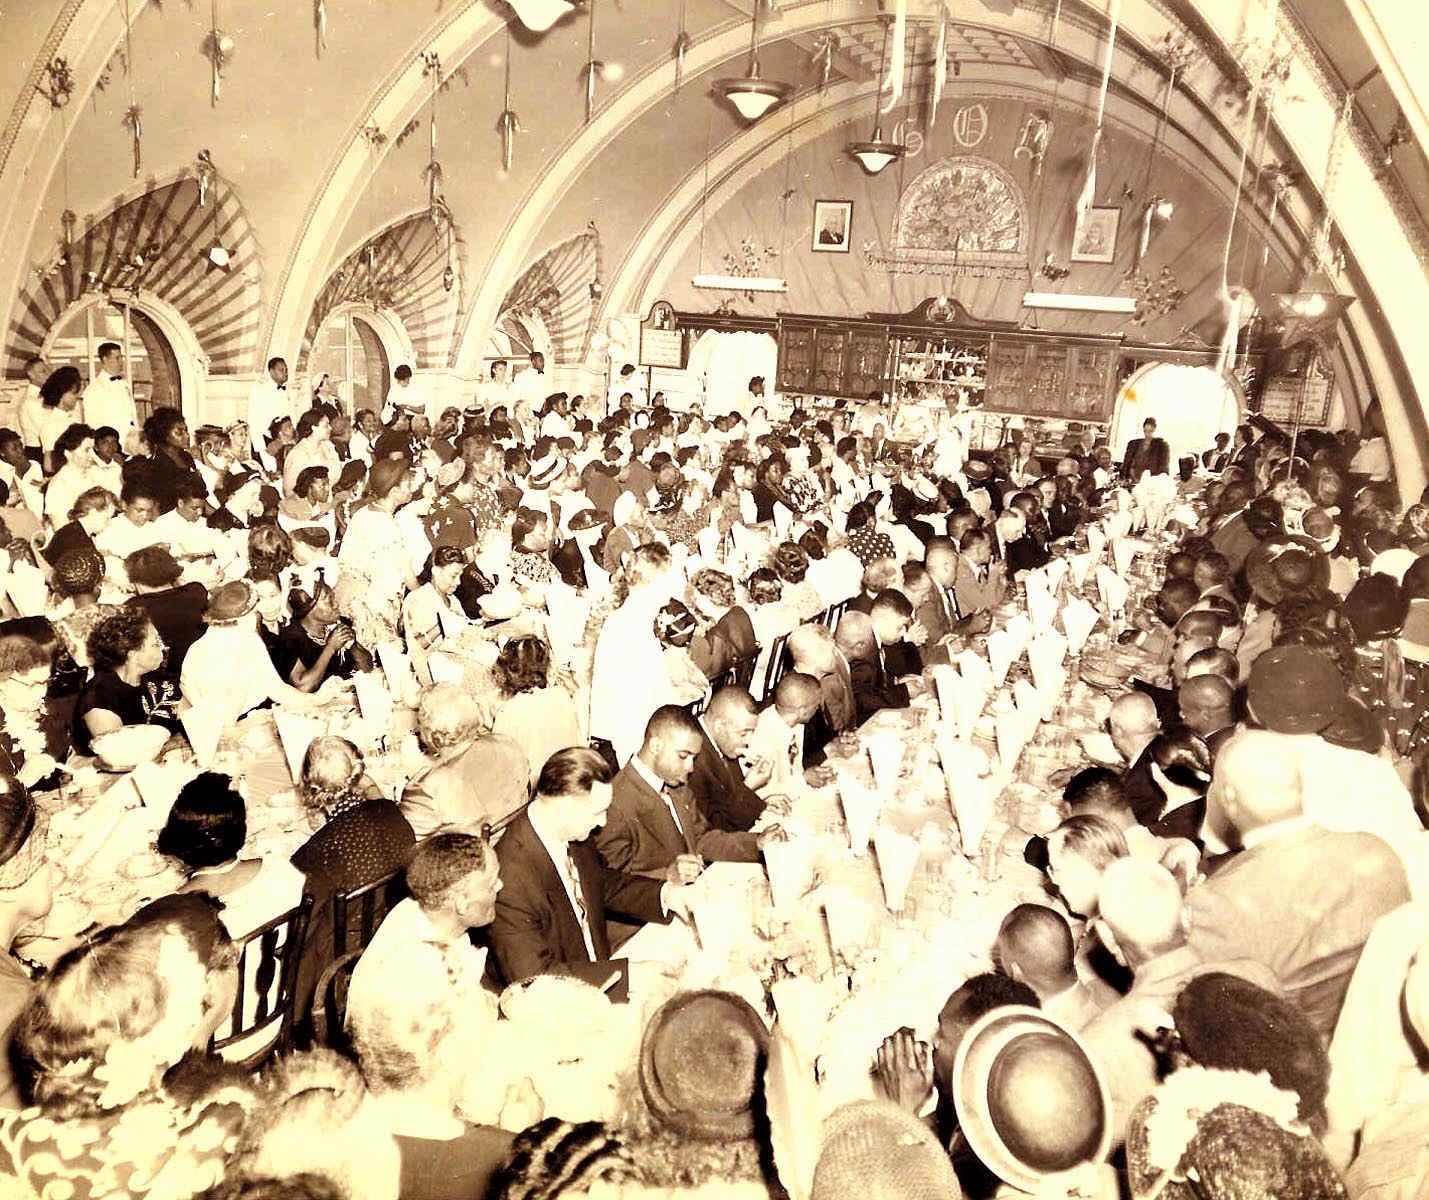 The Feast at The Divine Lorraine Hotel, Holy Communion Hall.